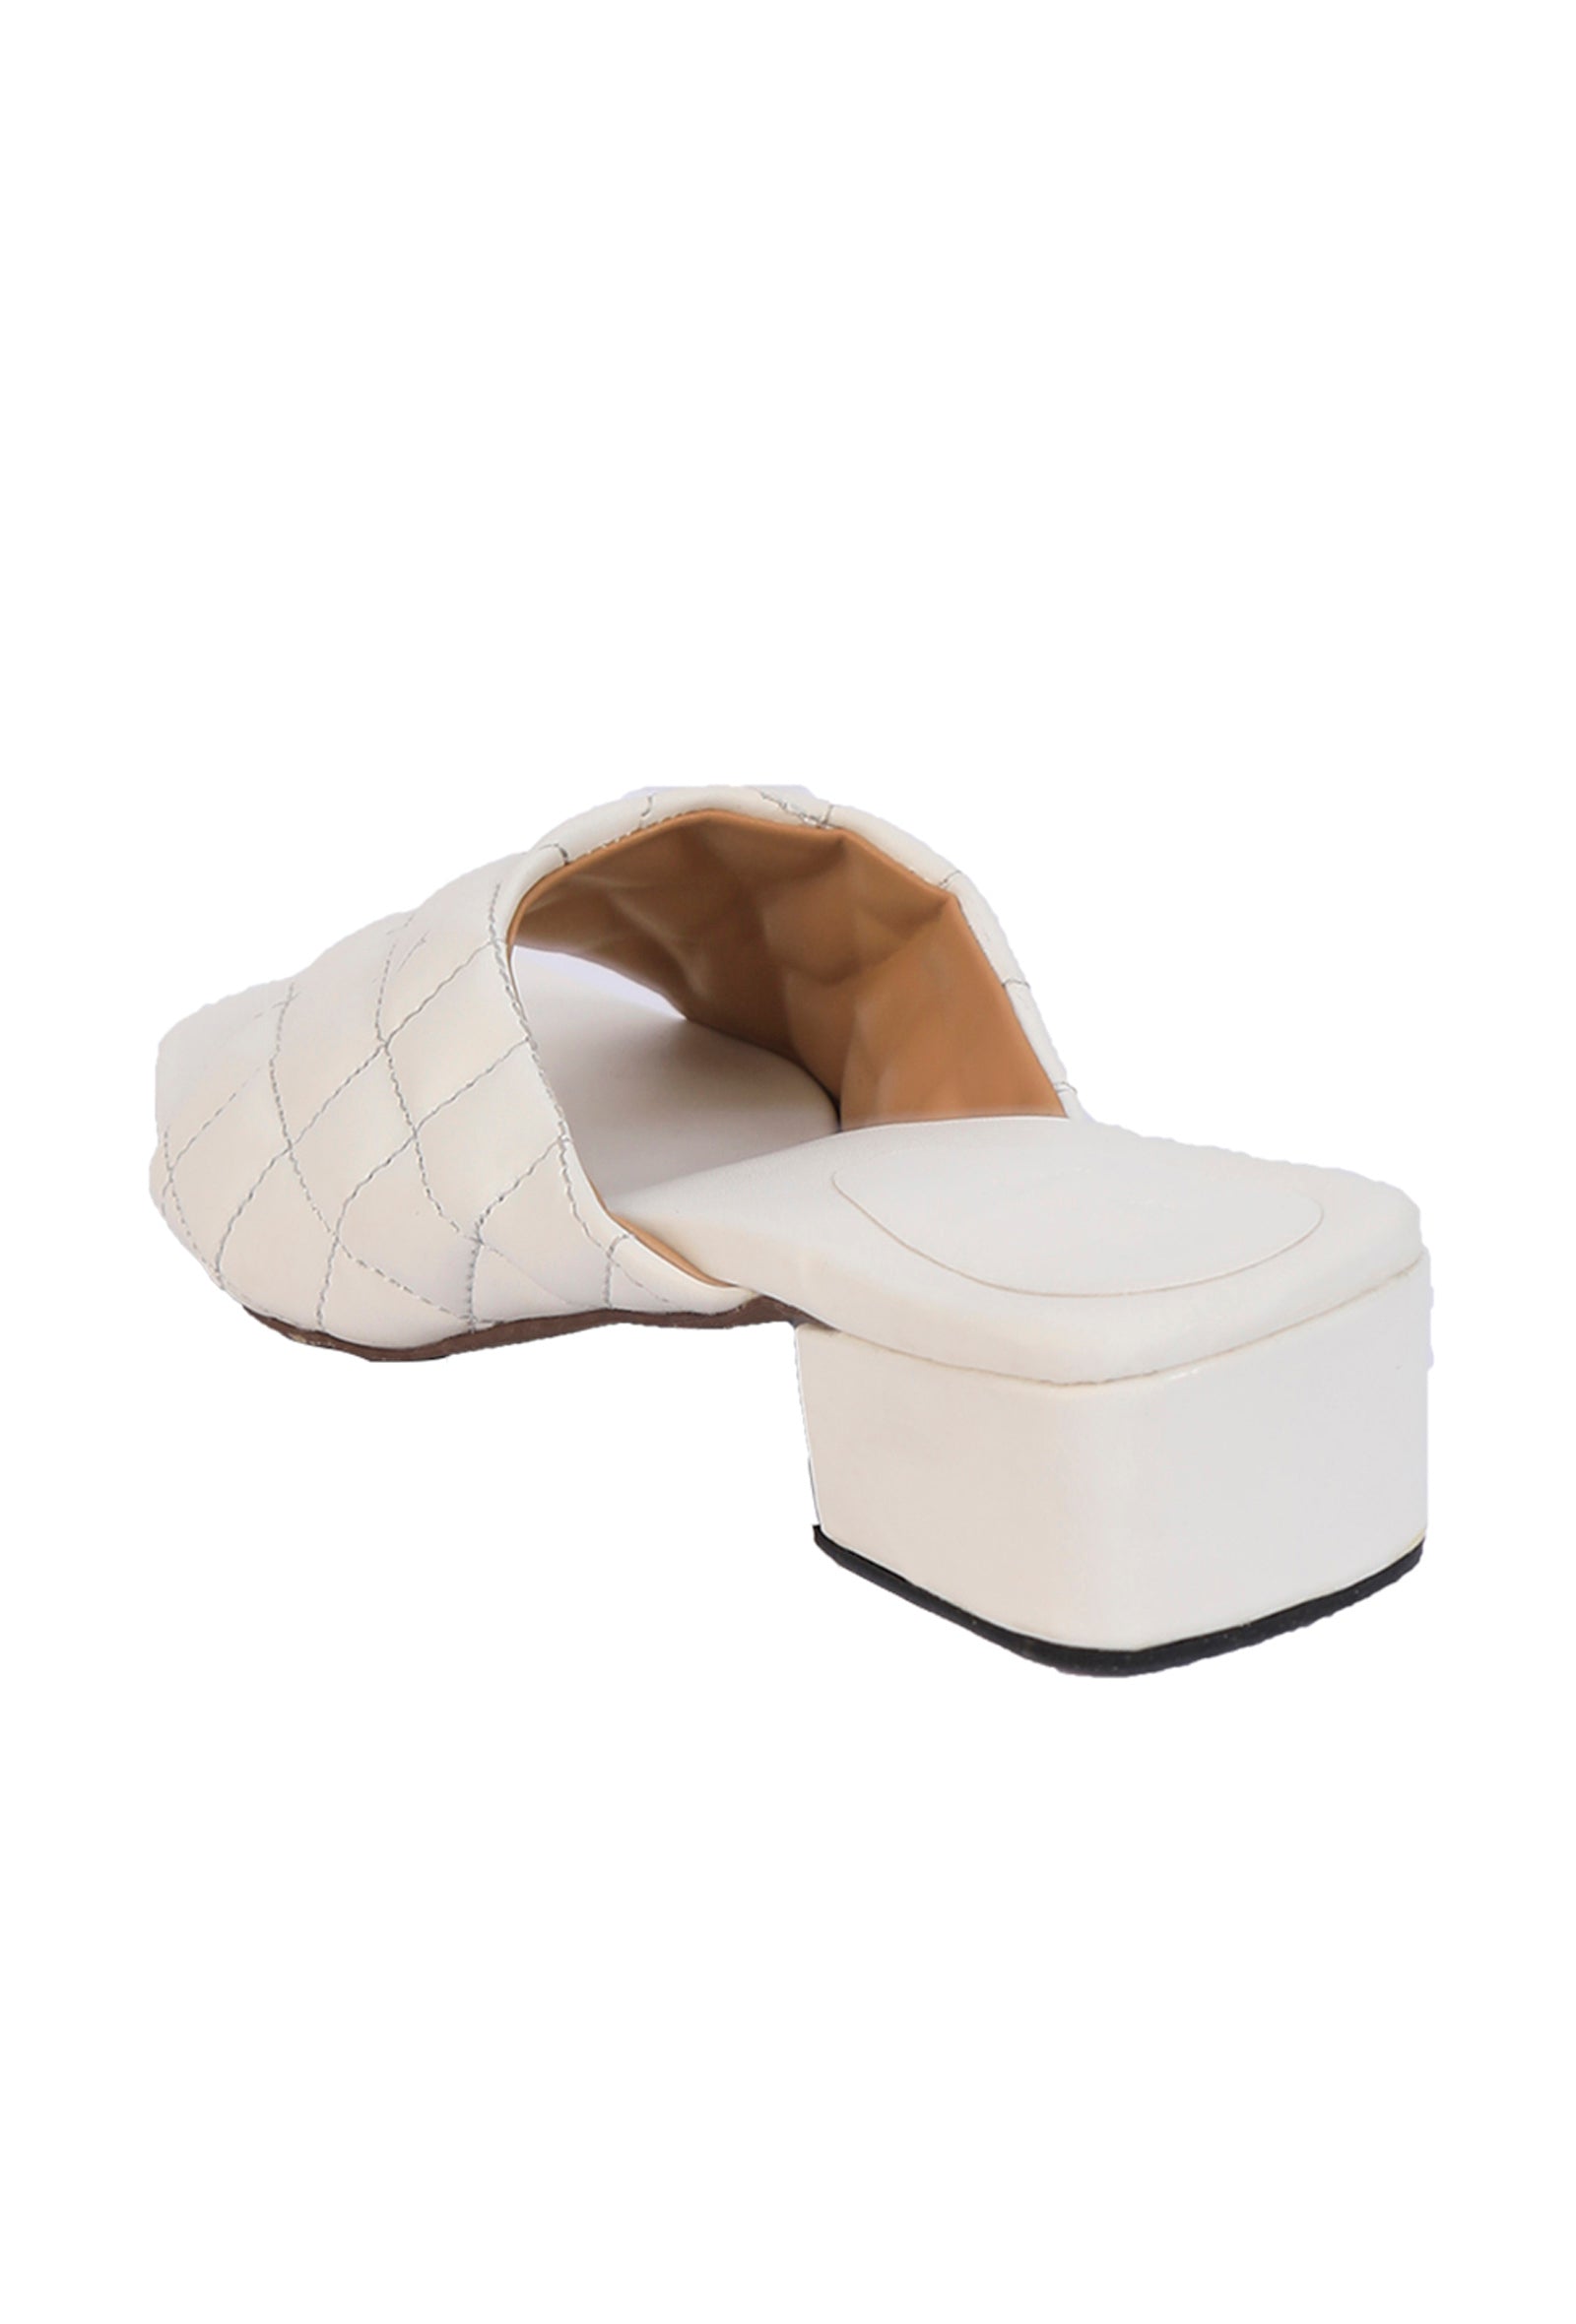 White Cushioned Cruelty Free Leather Heels